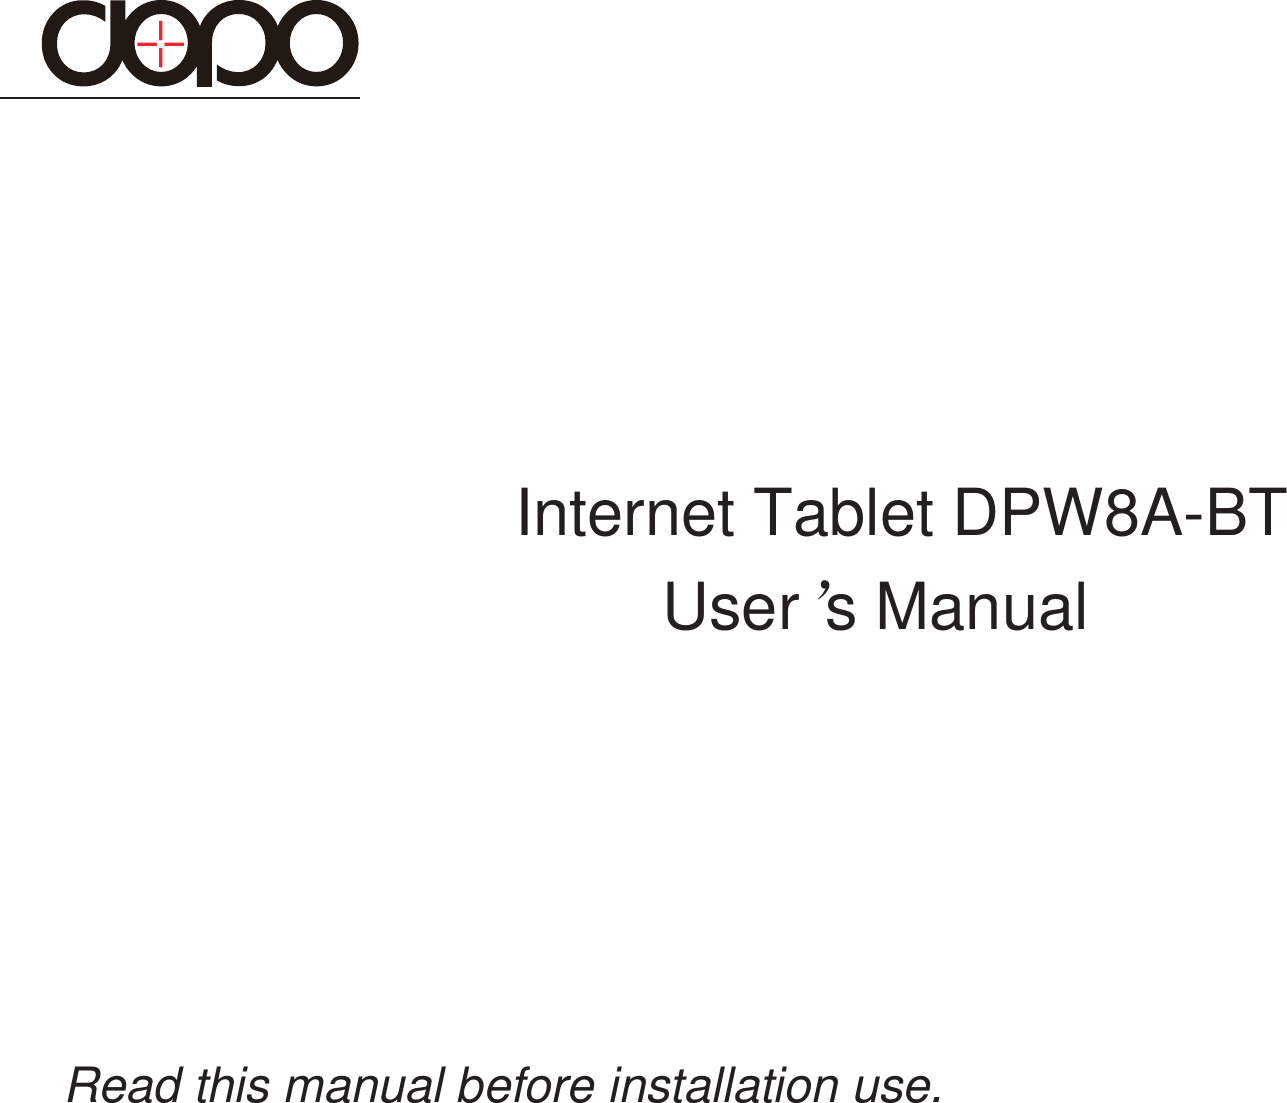 Userÿs ManualInternet Tablet DPW8A-BTRead this manual before installation use.